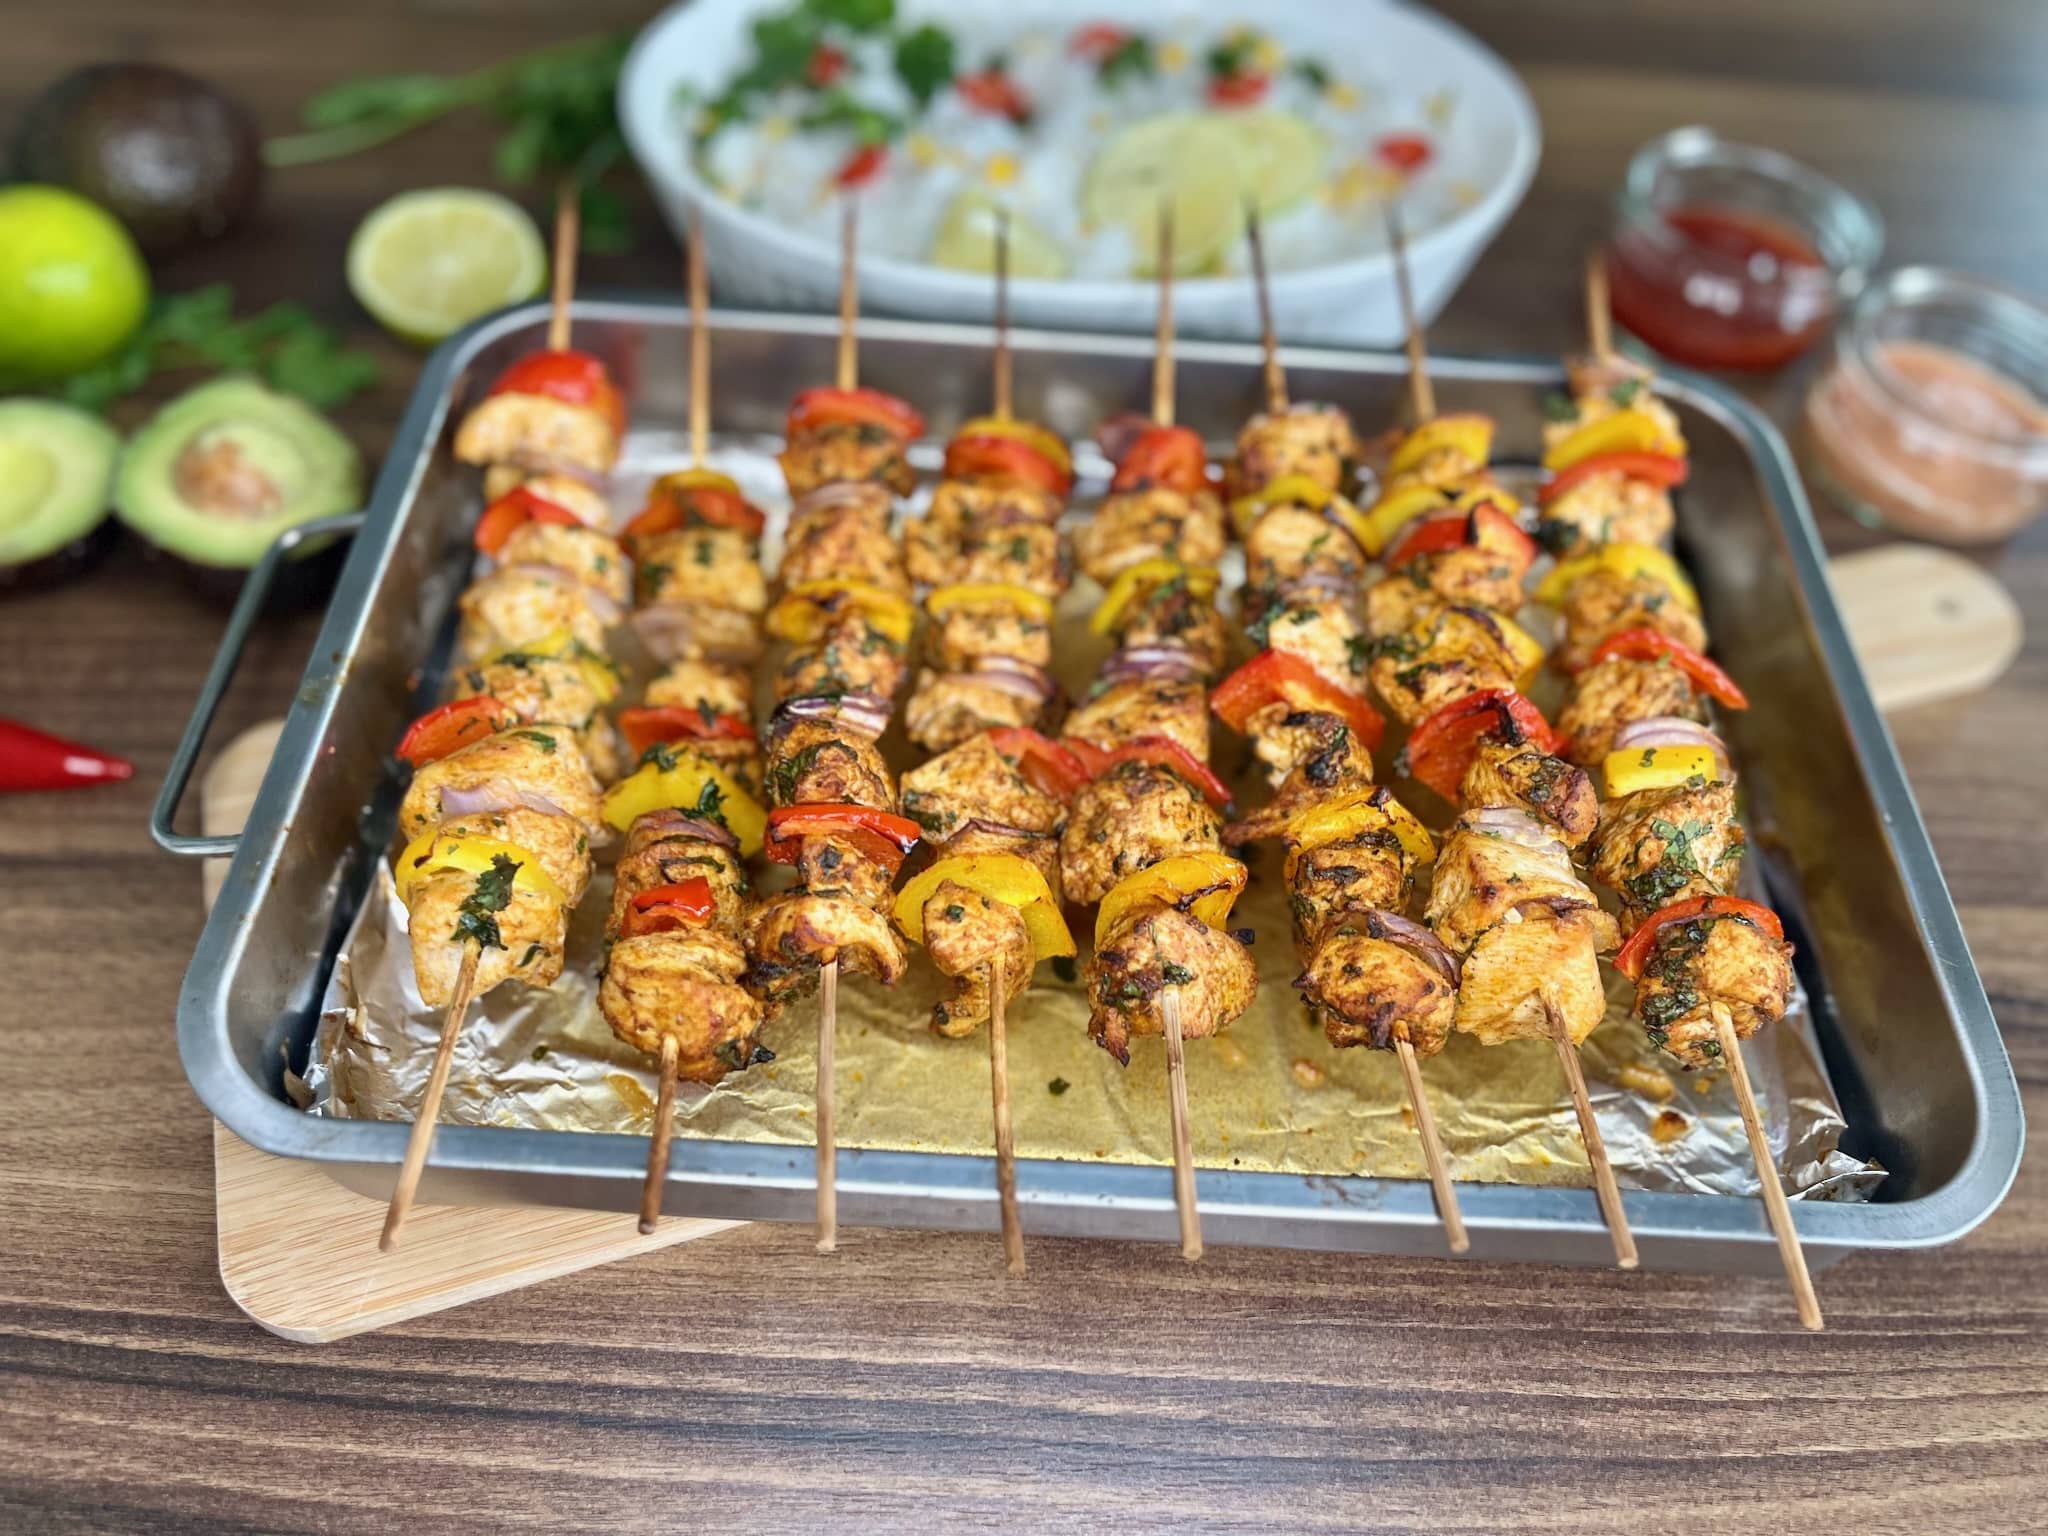 Freshly baked chicken skewers, straight from the oven